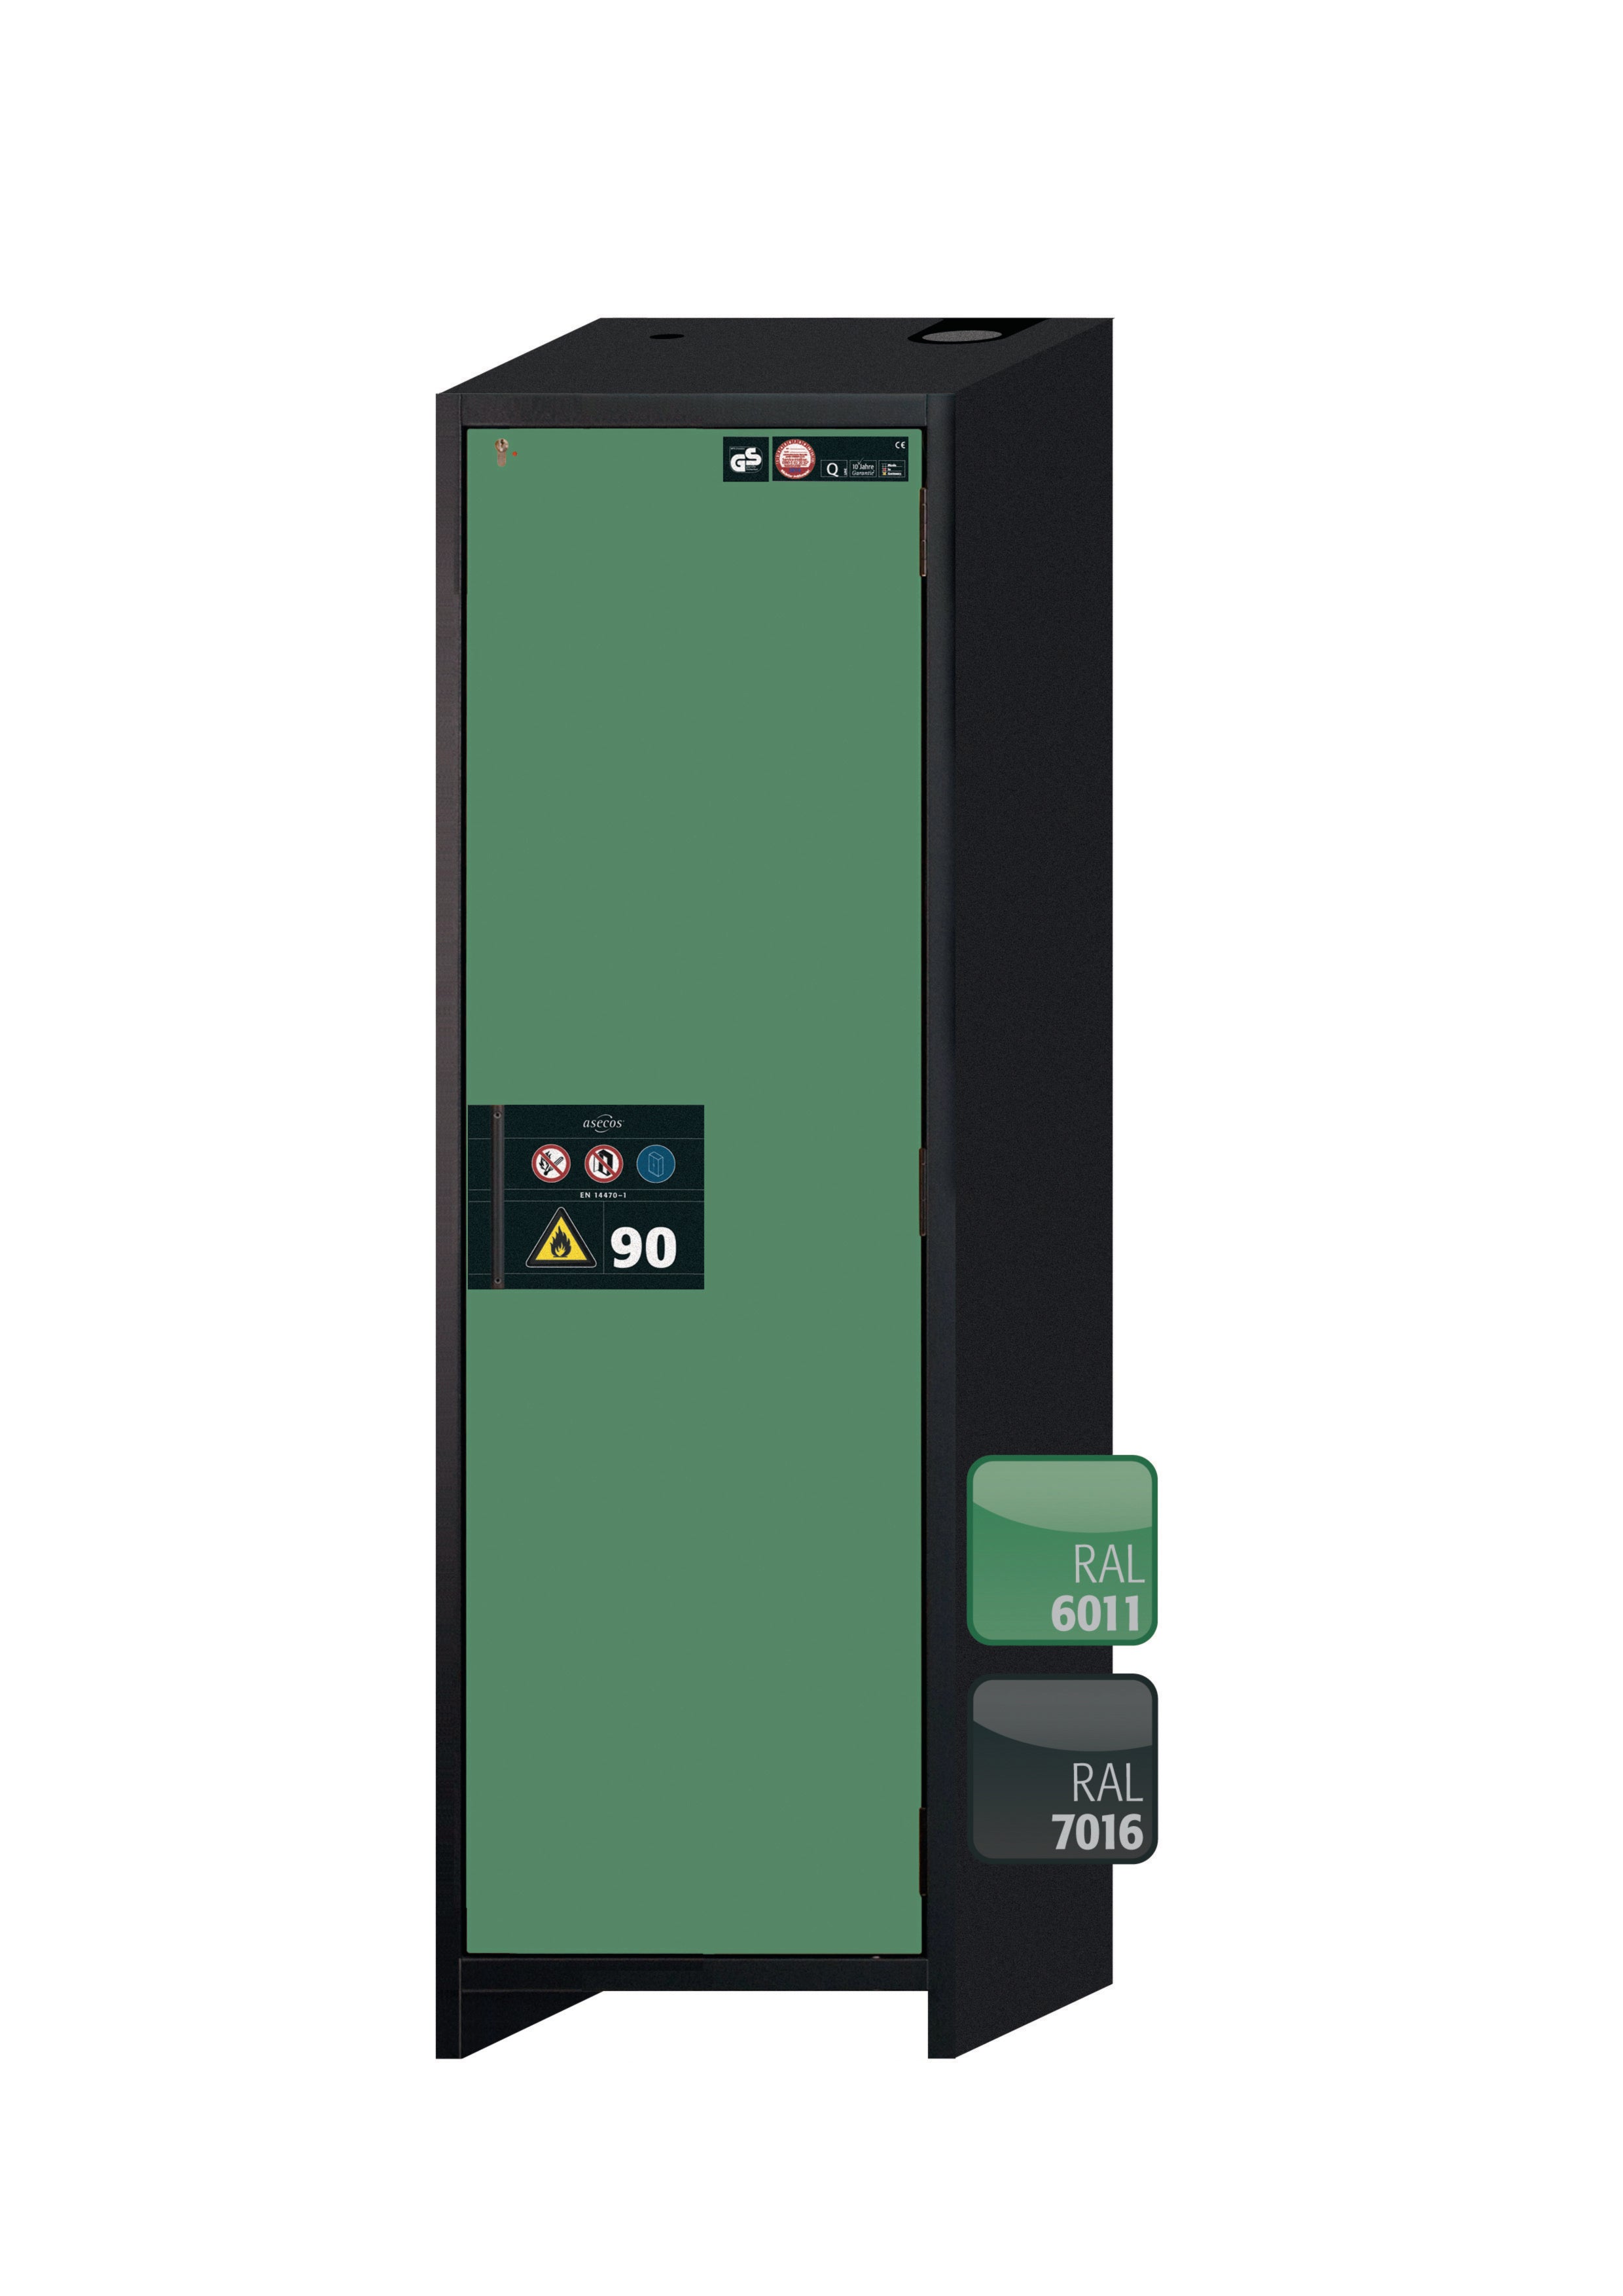 Type 90 safety storage cabinet Q-PEGASUS-90 model Q90.195.060.WDACR in reseda green RAL 6011 with 4x drawer (standard) (sheet steel),